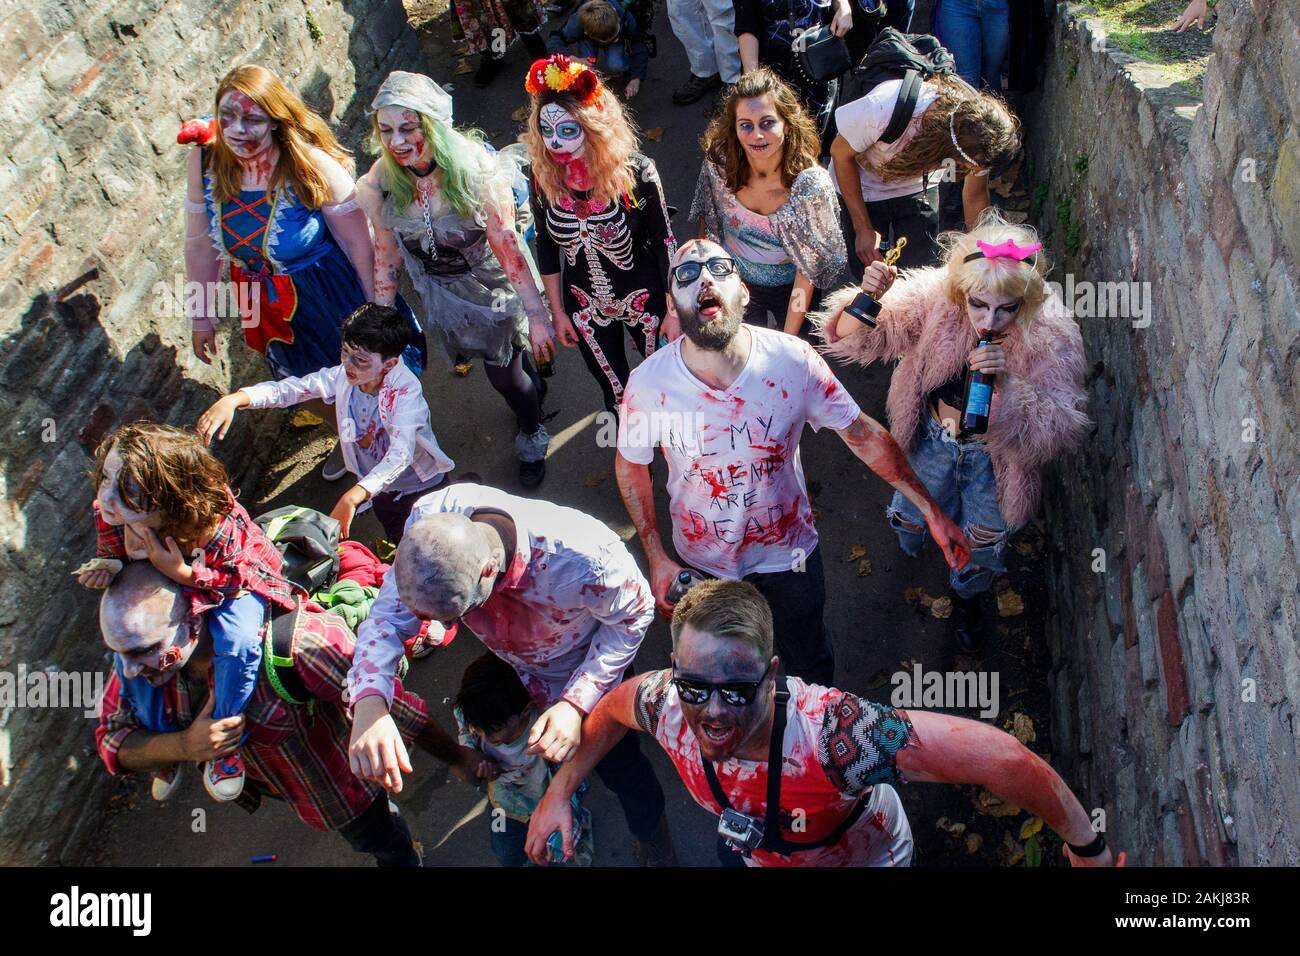 Bristol, UK. 28th Oct, 2017. People dressed as a zombies are pictured as they participate in a zombie walk through the city centre. Stock Photo